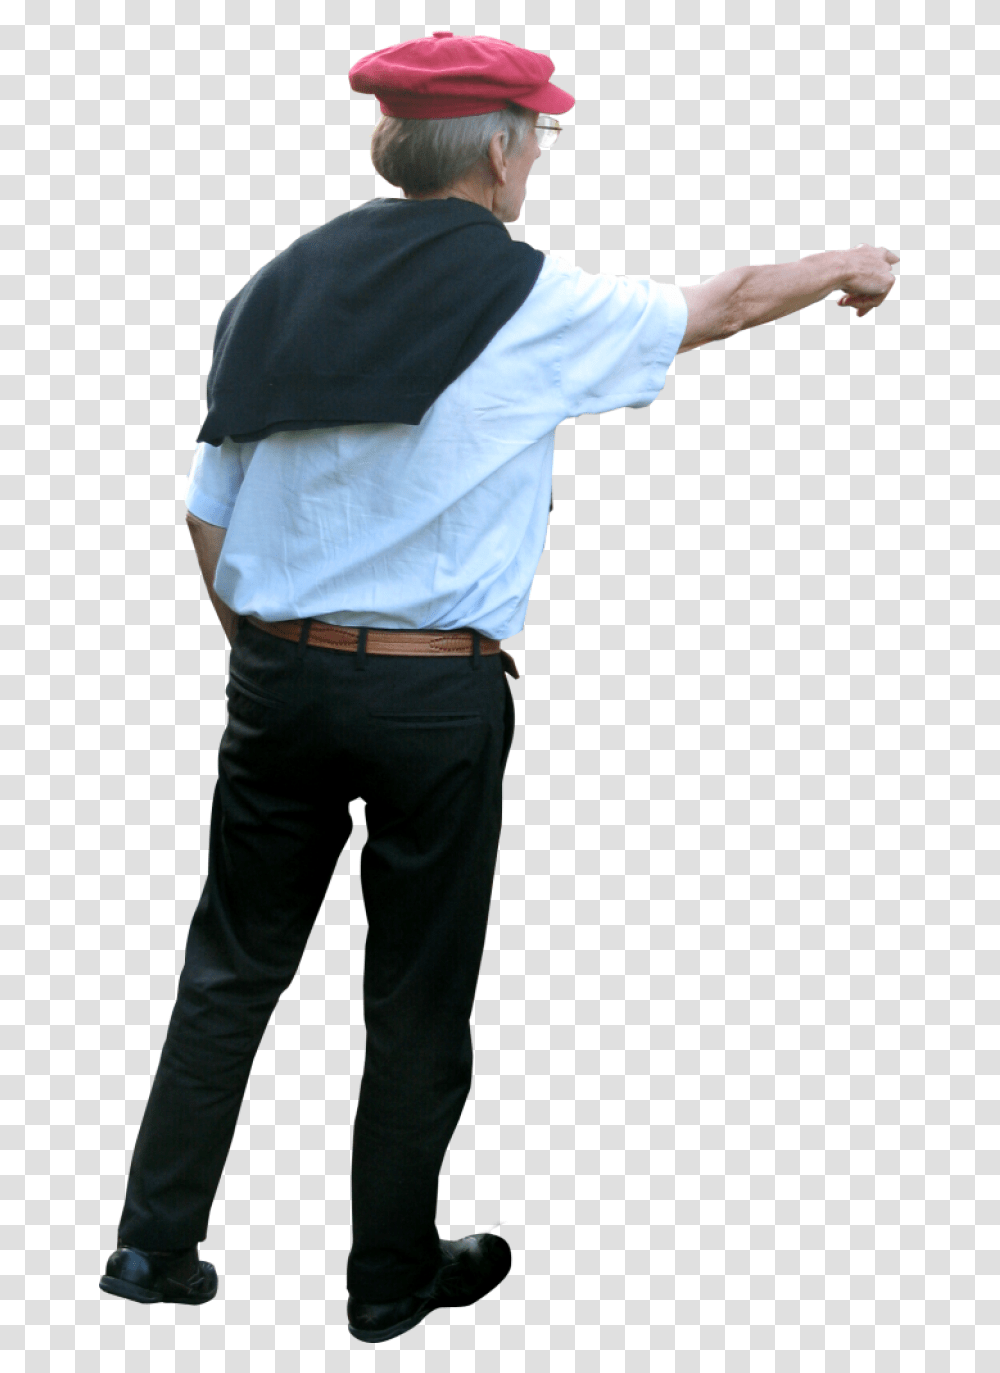 Pointer To The Right Image Person Pointing Architecture, Pants, Shirt, Sleeve Transparent Png